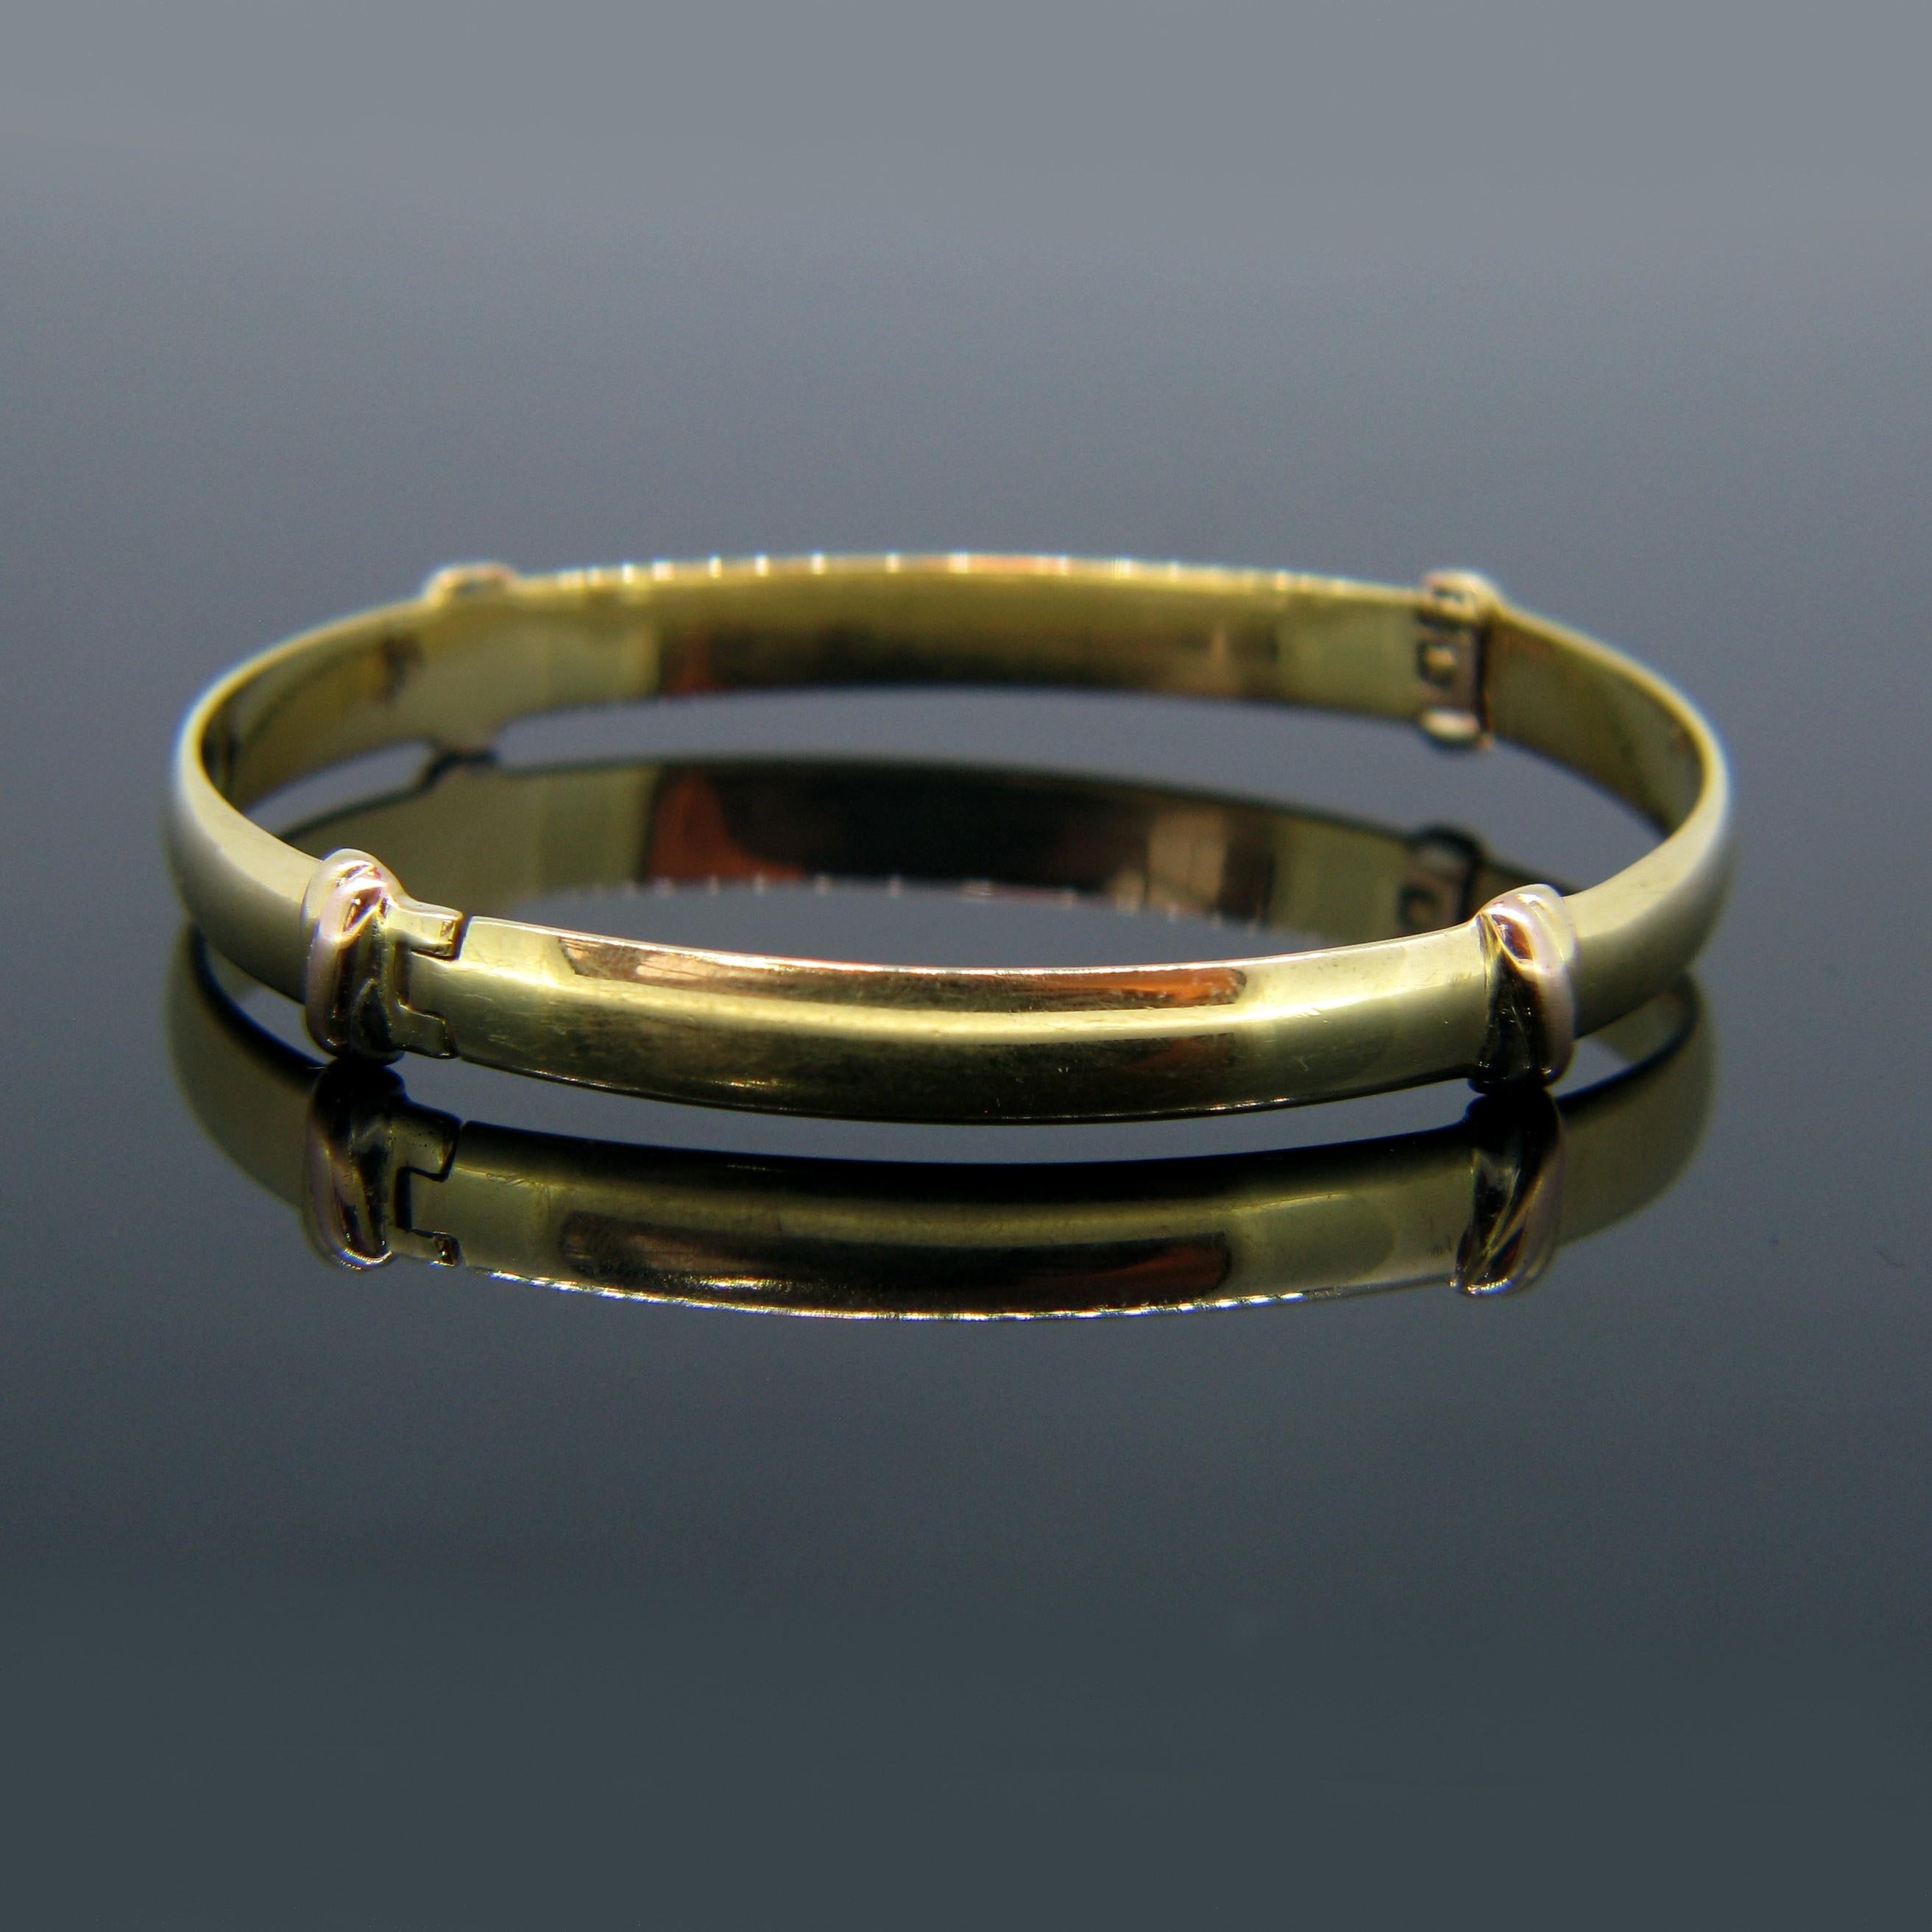 This bangle is signed Cartier and is numbered. It is made in 18kt white, yellow and rose gold with the famous Trinity colours from Cartier. It is a very comfortable bangle to wear every day. It opens in half from the